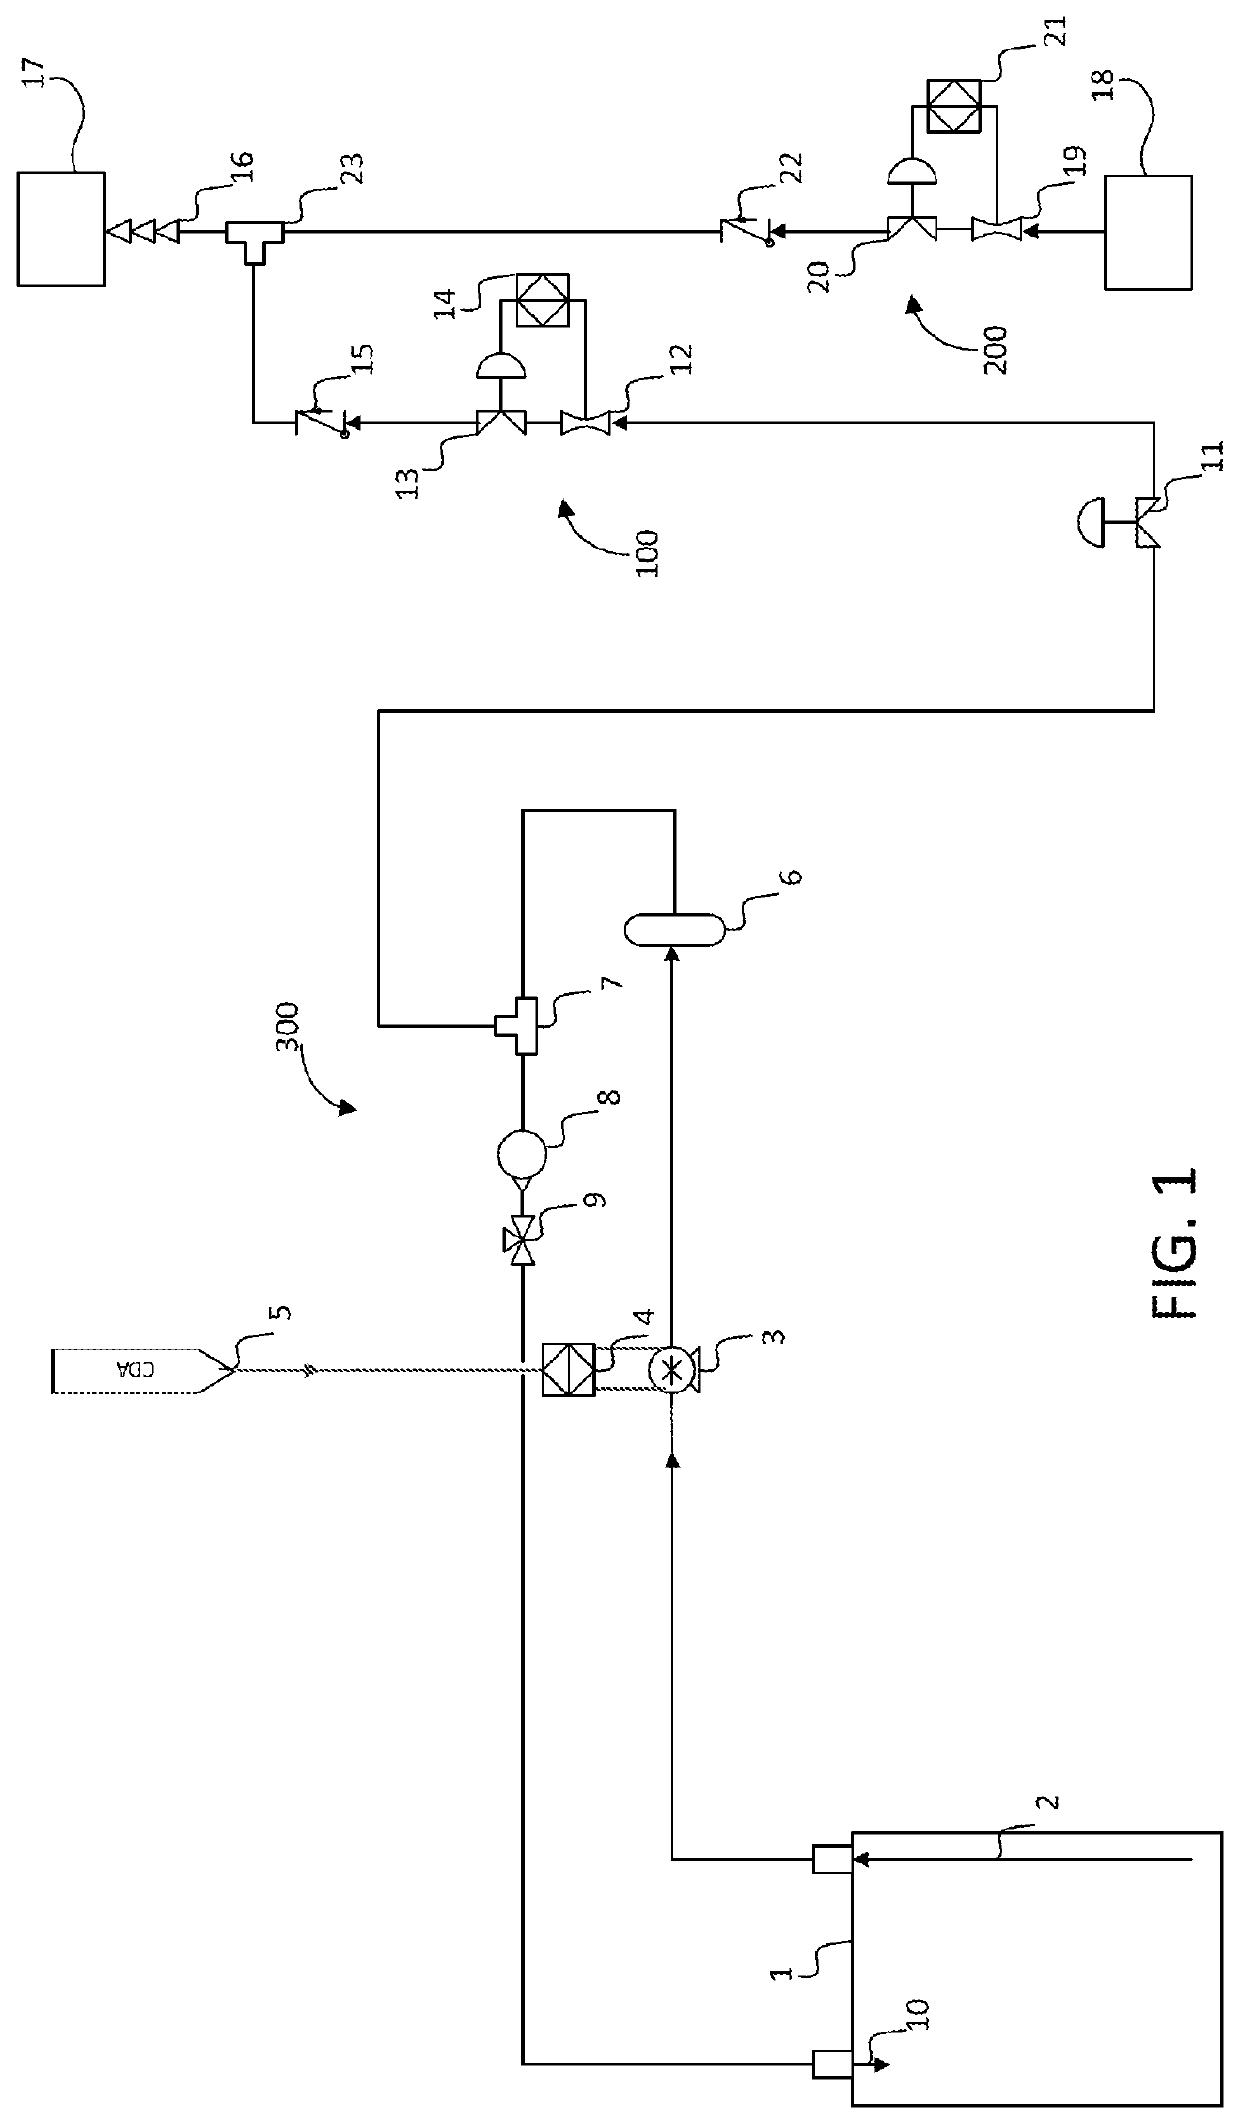 Low pressure fluctuation apparatuses for blending fluids, and methods of using the same